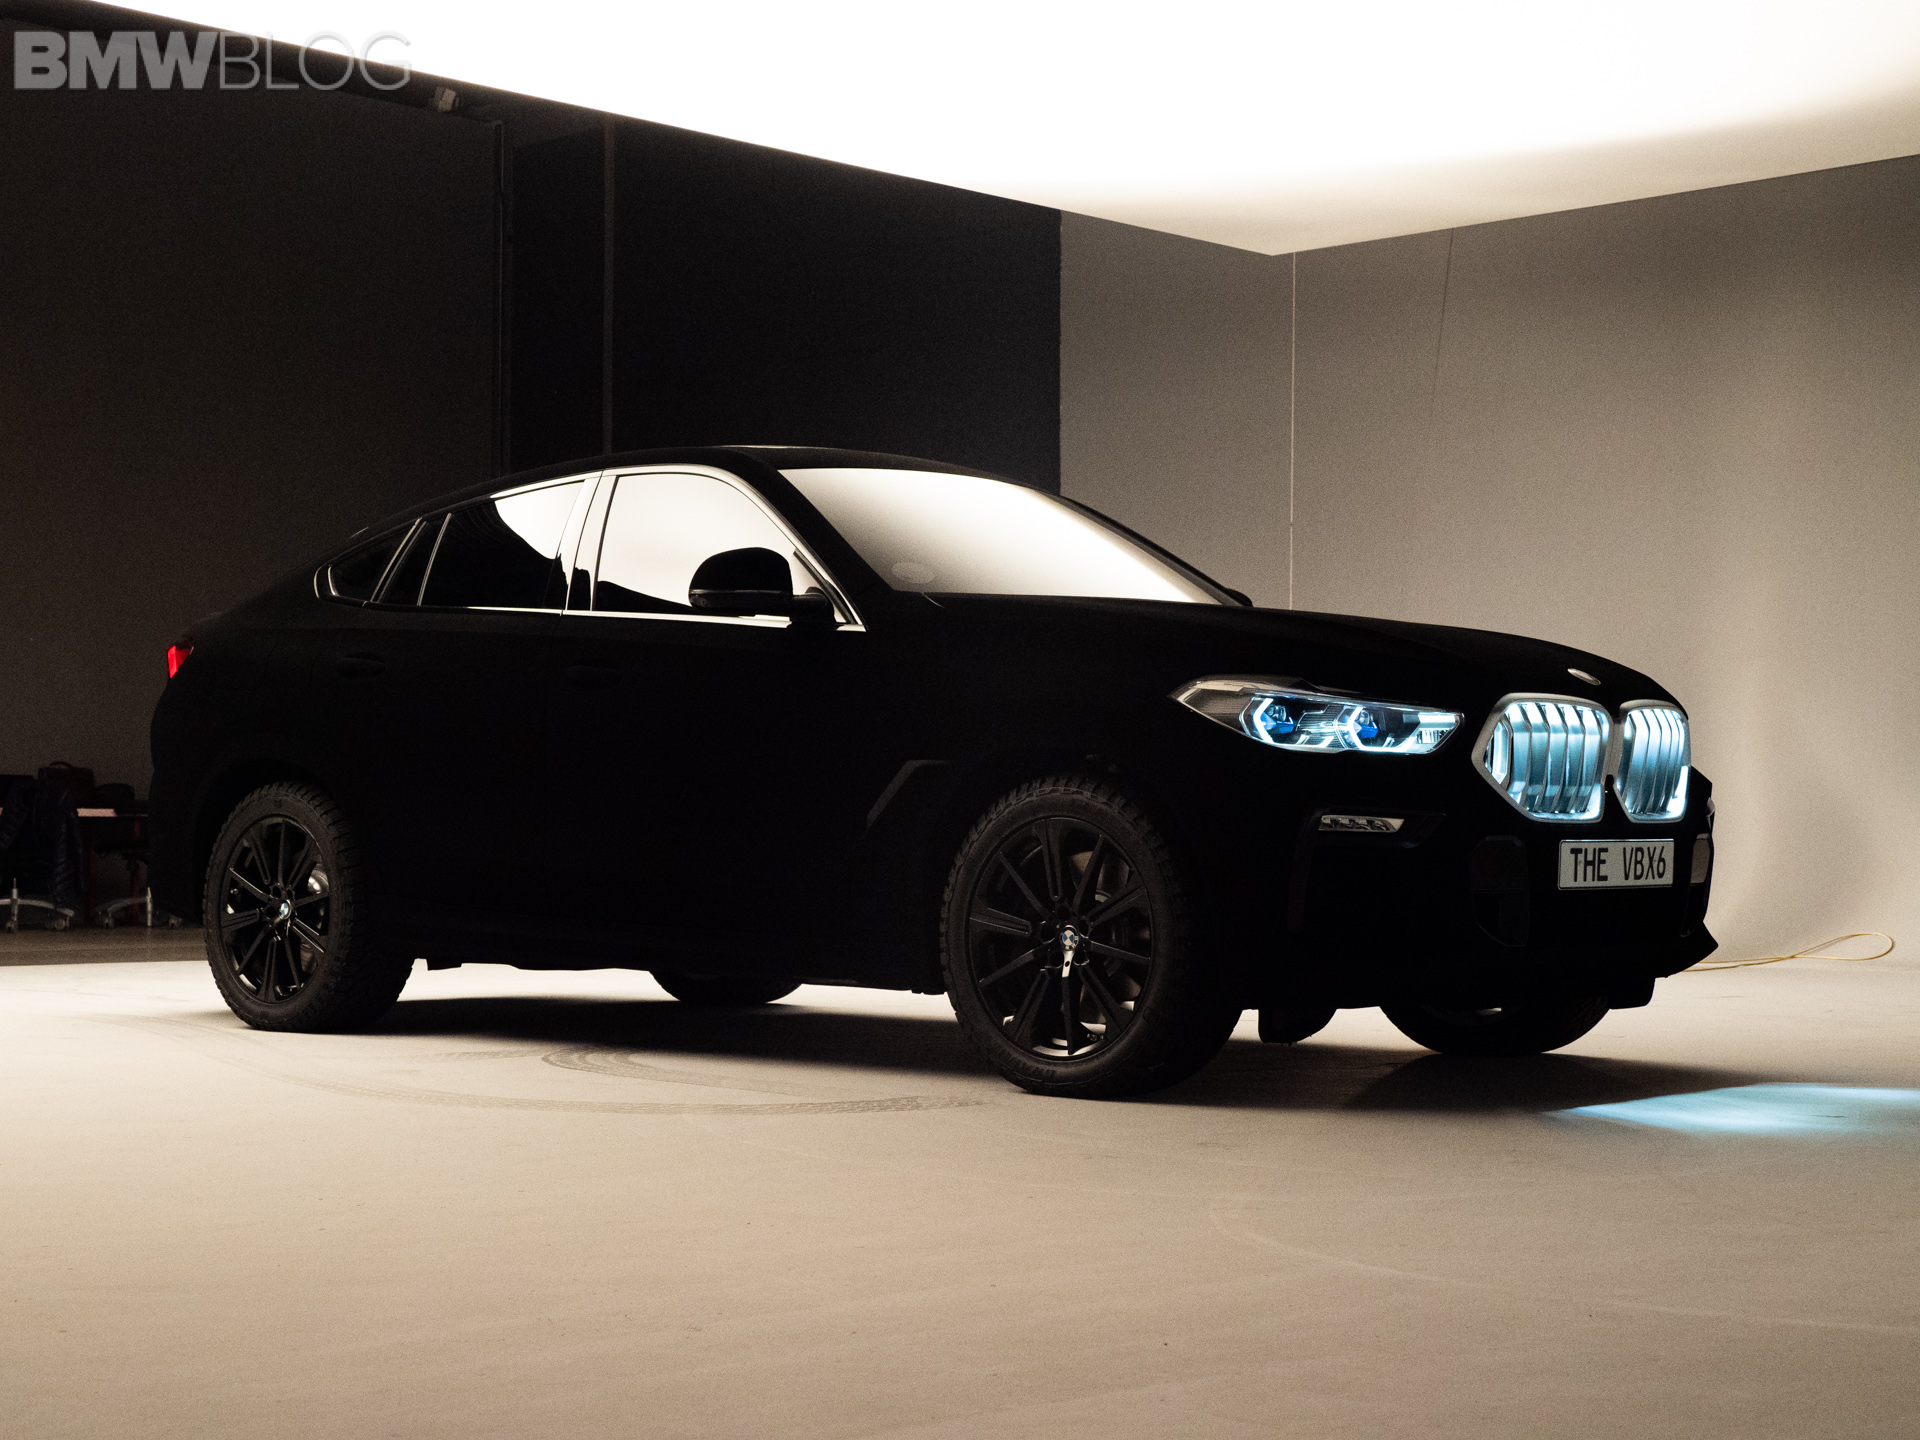 A Final Look At The BMW X6 Vantablack – The Darkest Color In The World ...